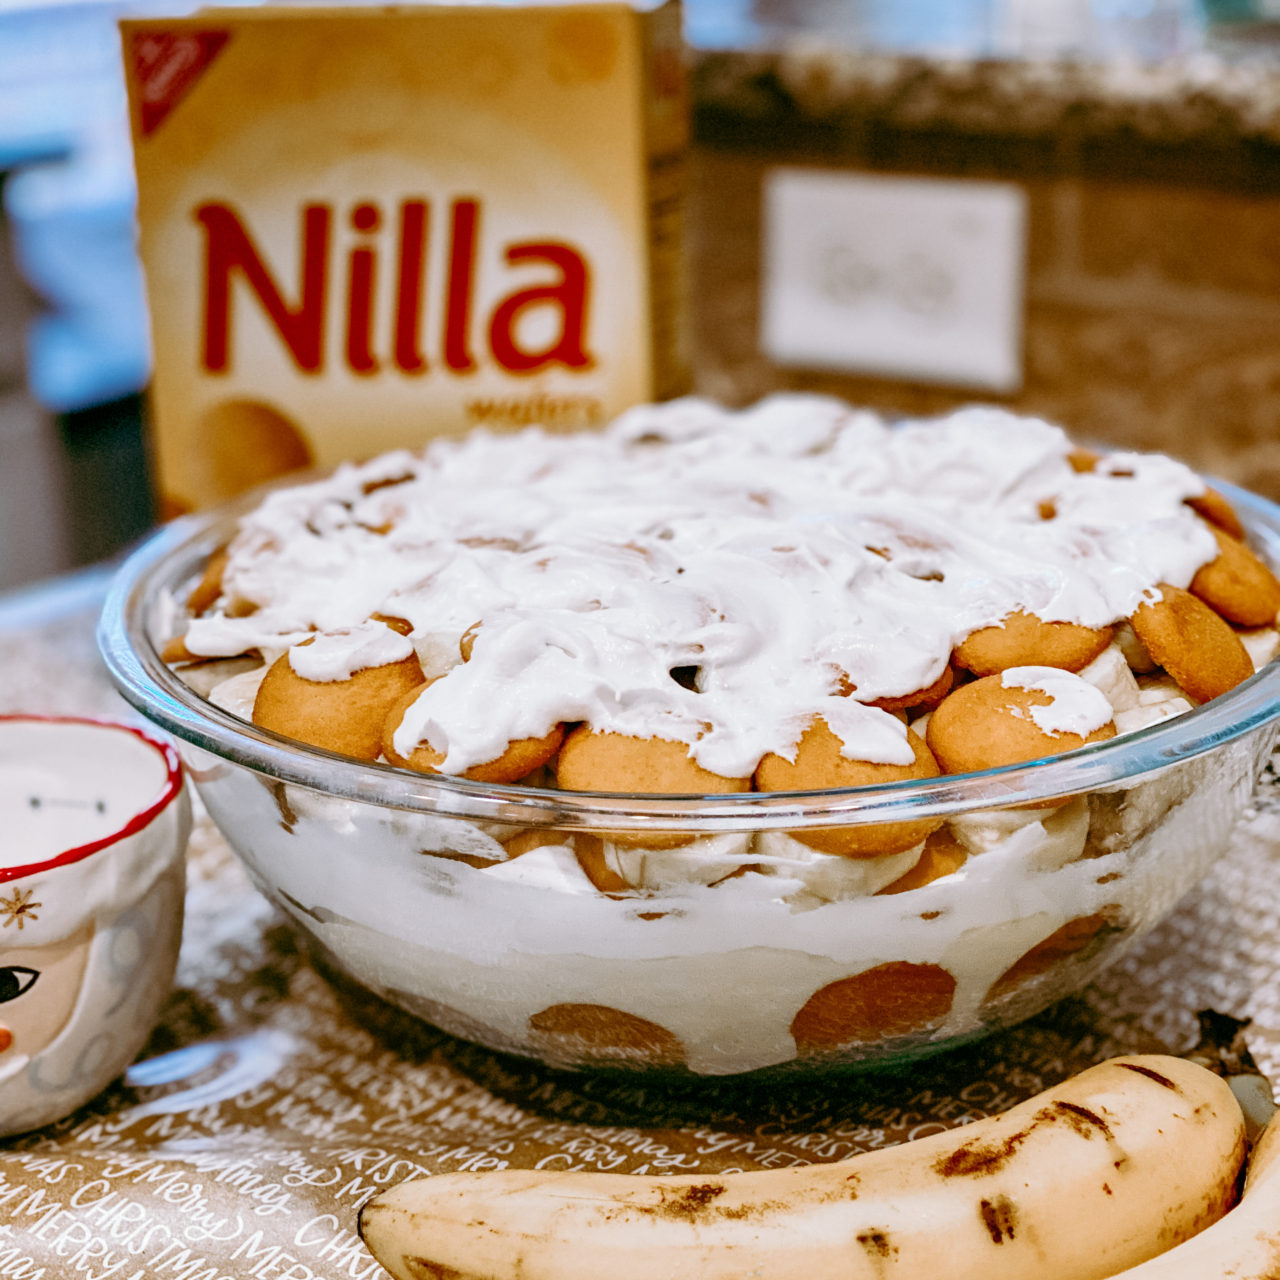 Quick, easy, and delicious banana pudding